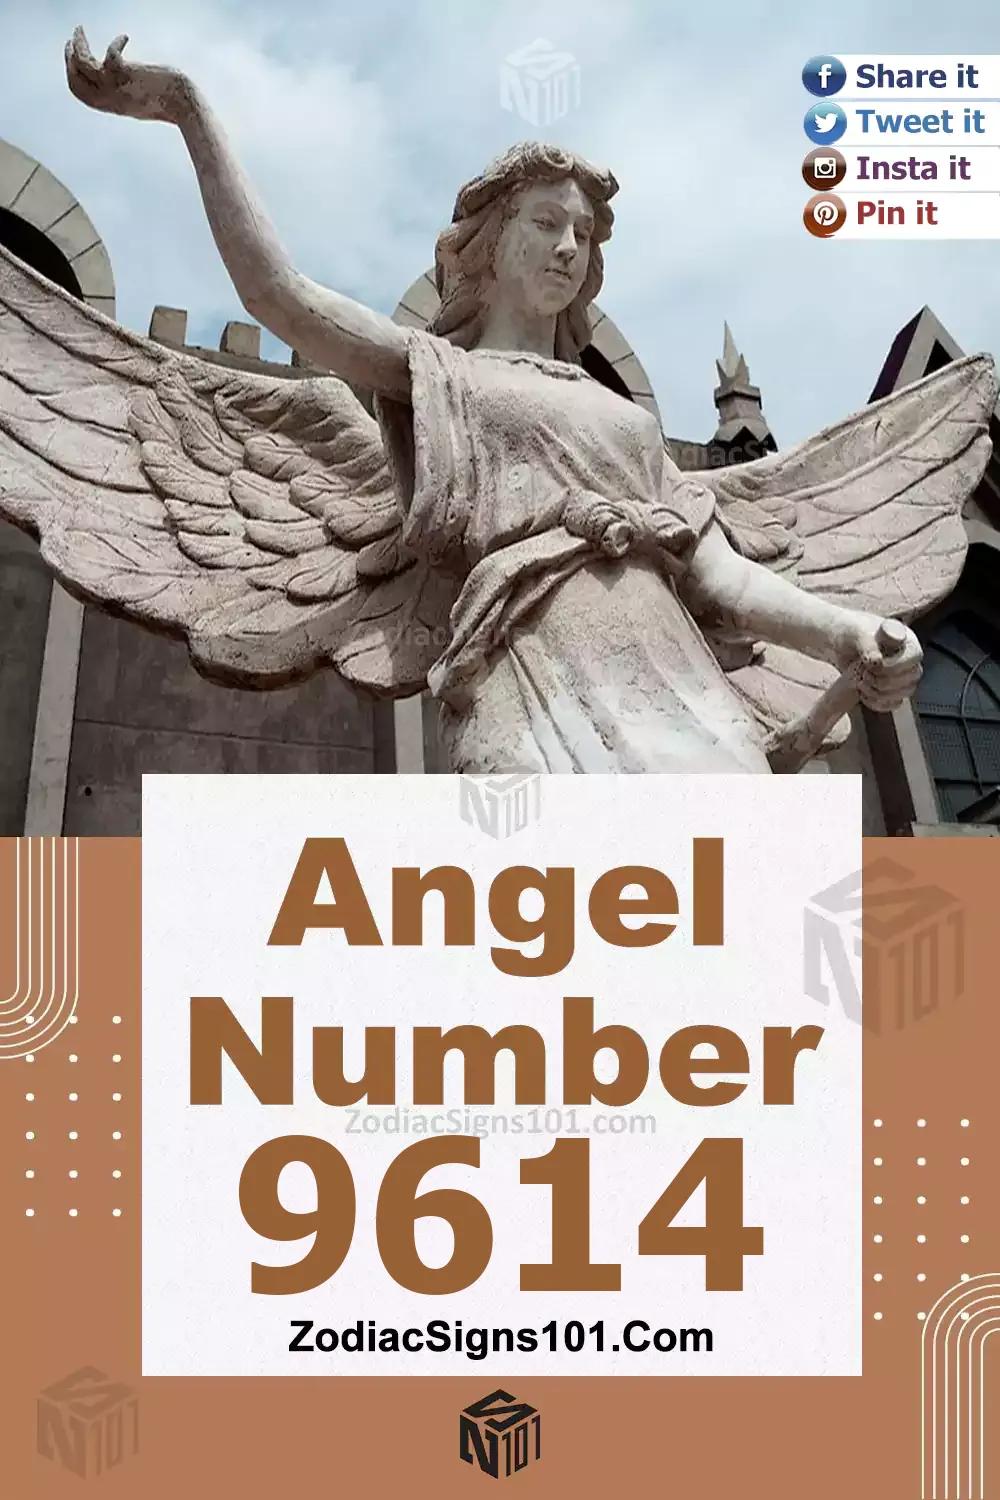 9614 Angel Number Meaning